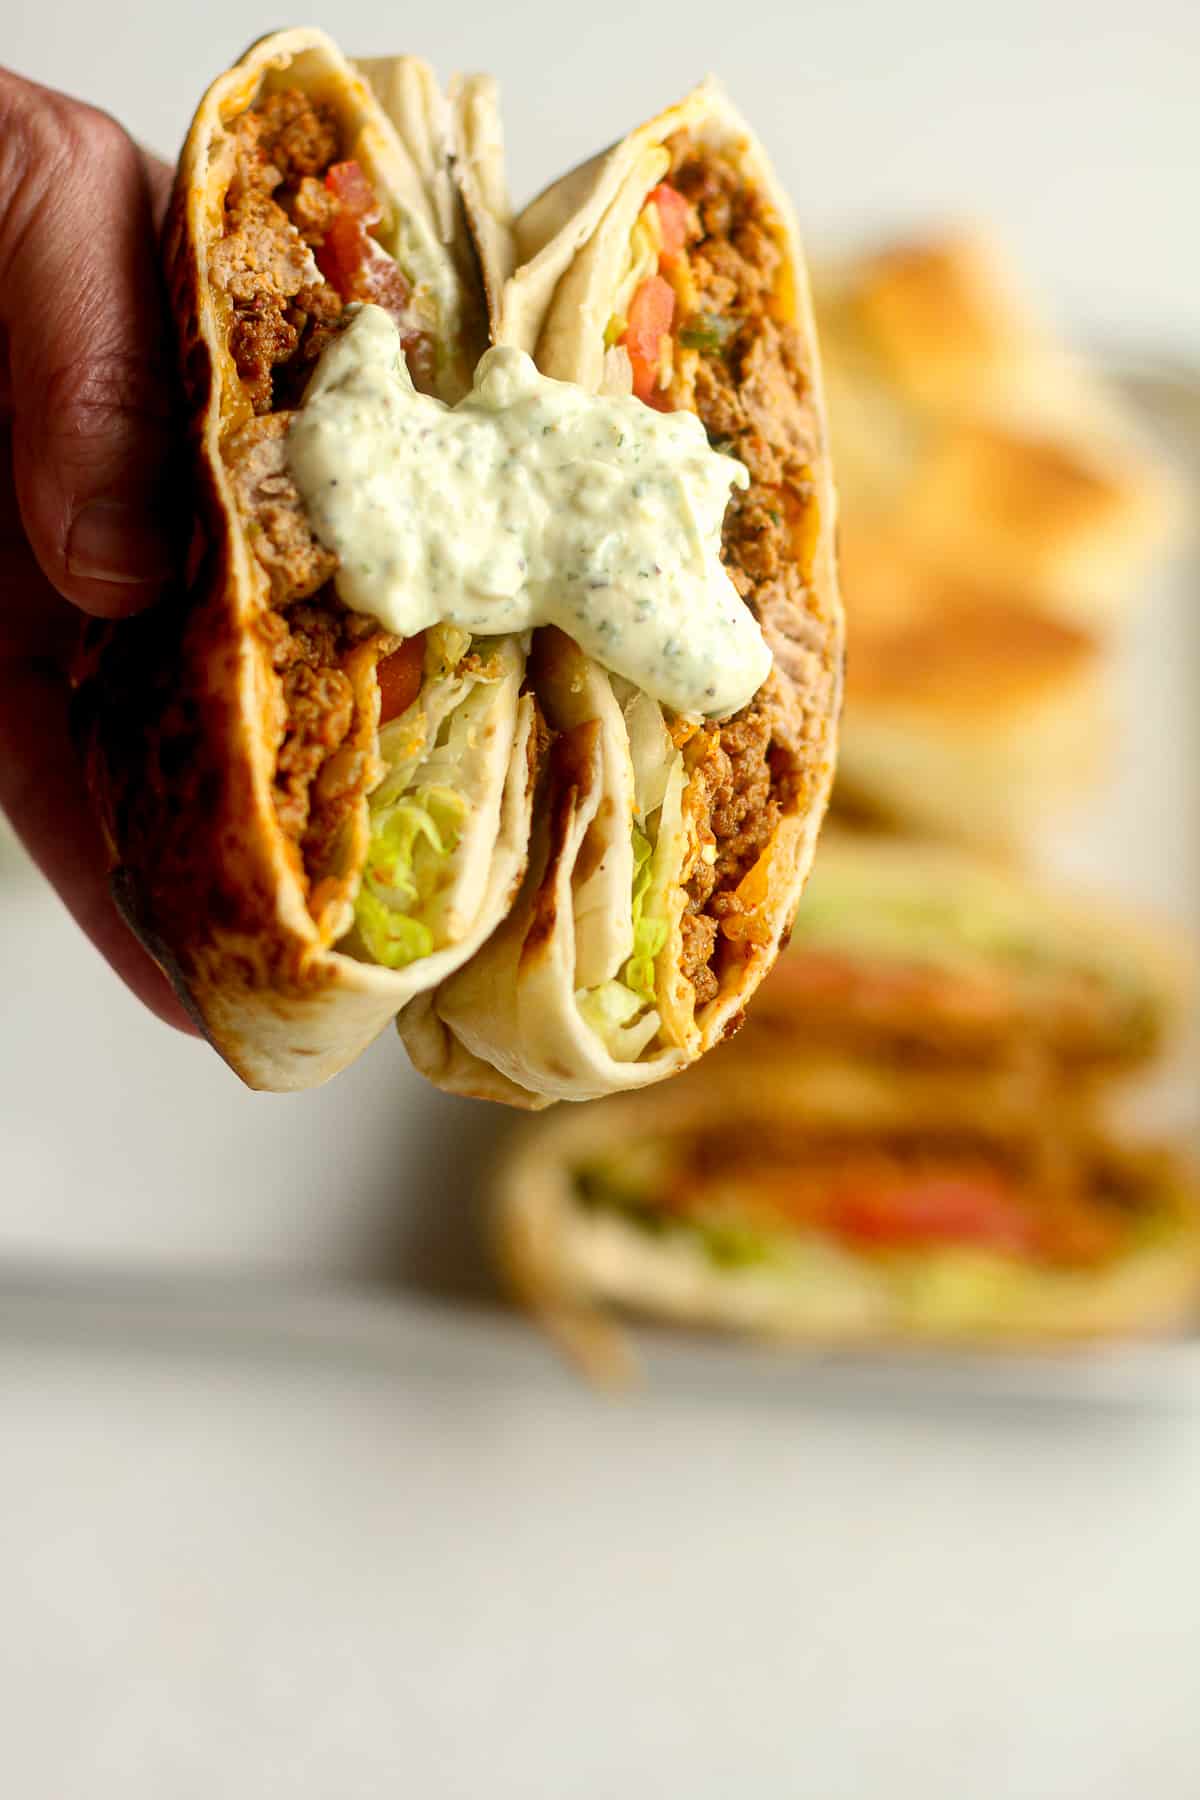 A hand holding a split taco crunch wrap with jalapeno ranch.